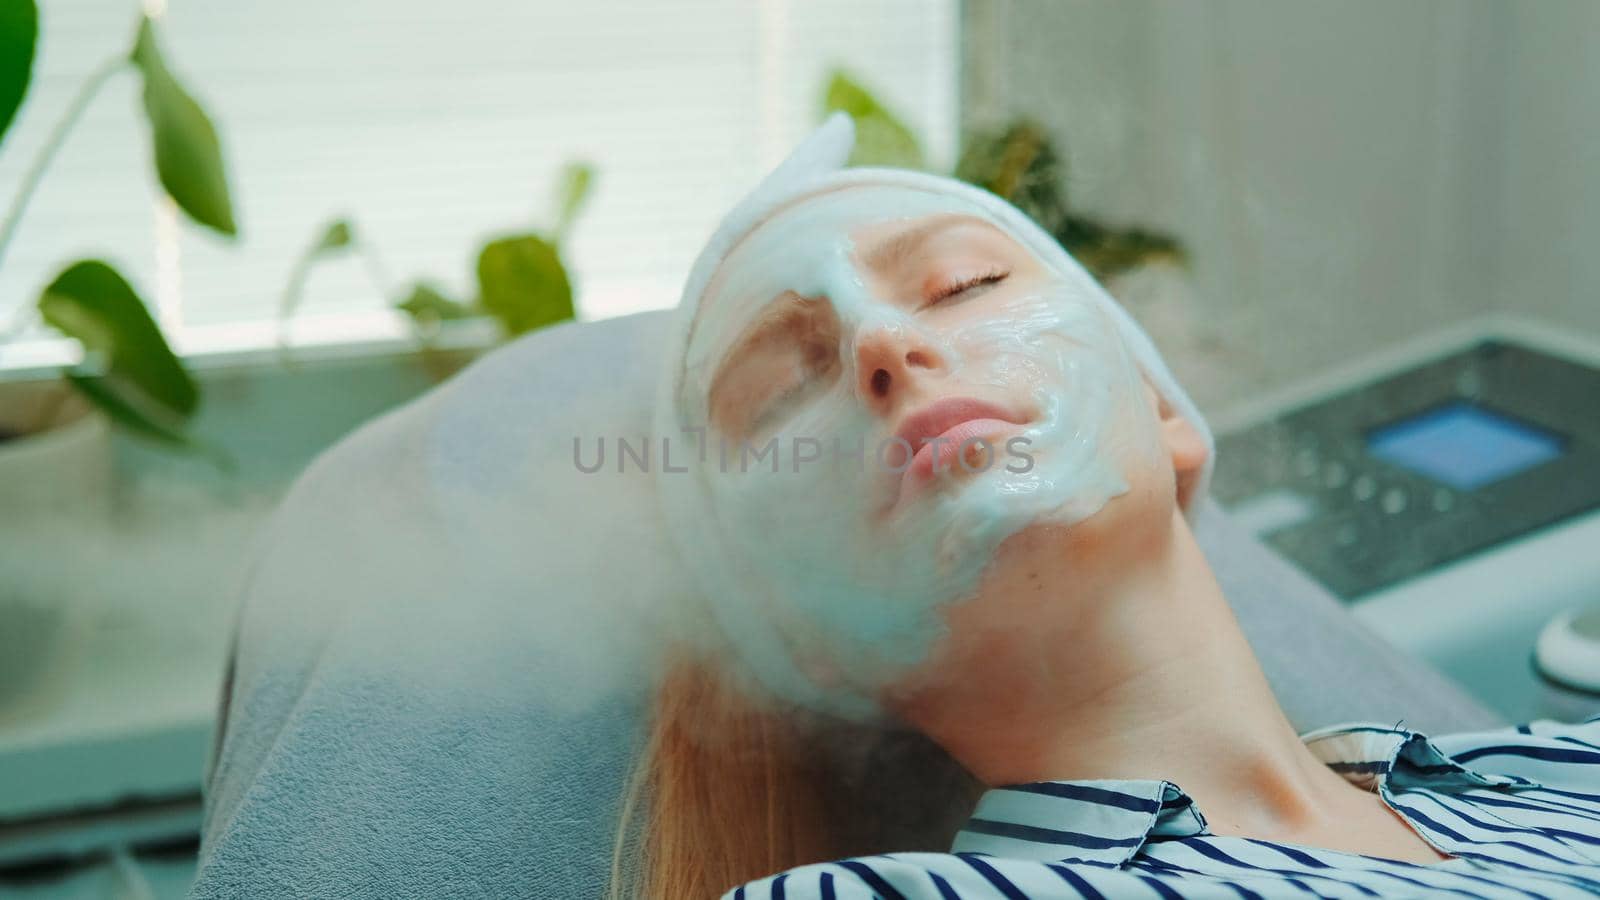 Medium close-up shot of professional facial skin care treatment with a cosmetic steamer at beauty salon. The Steam cleaning procedure of the face.